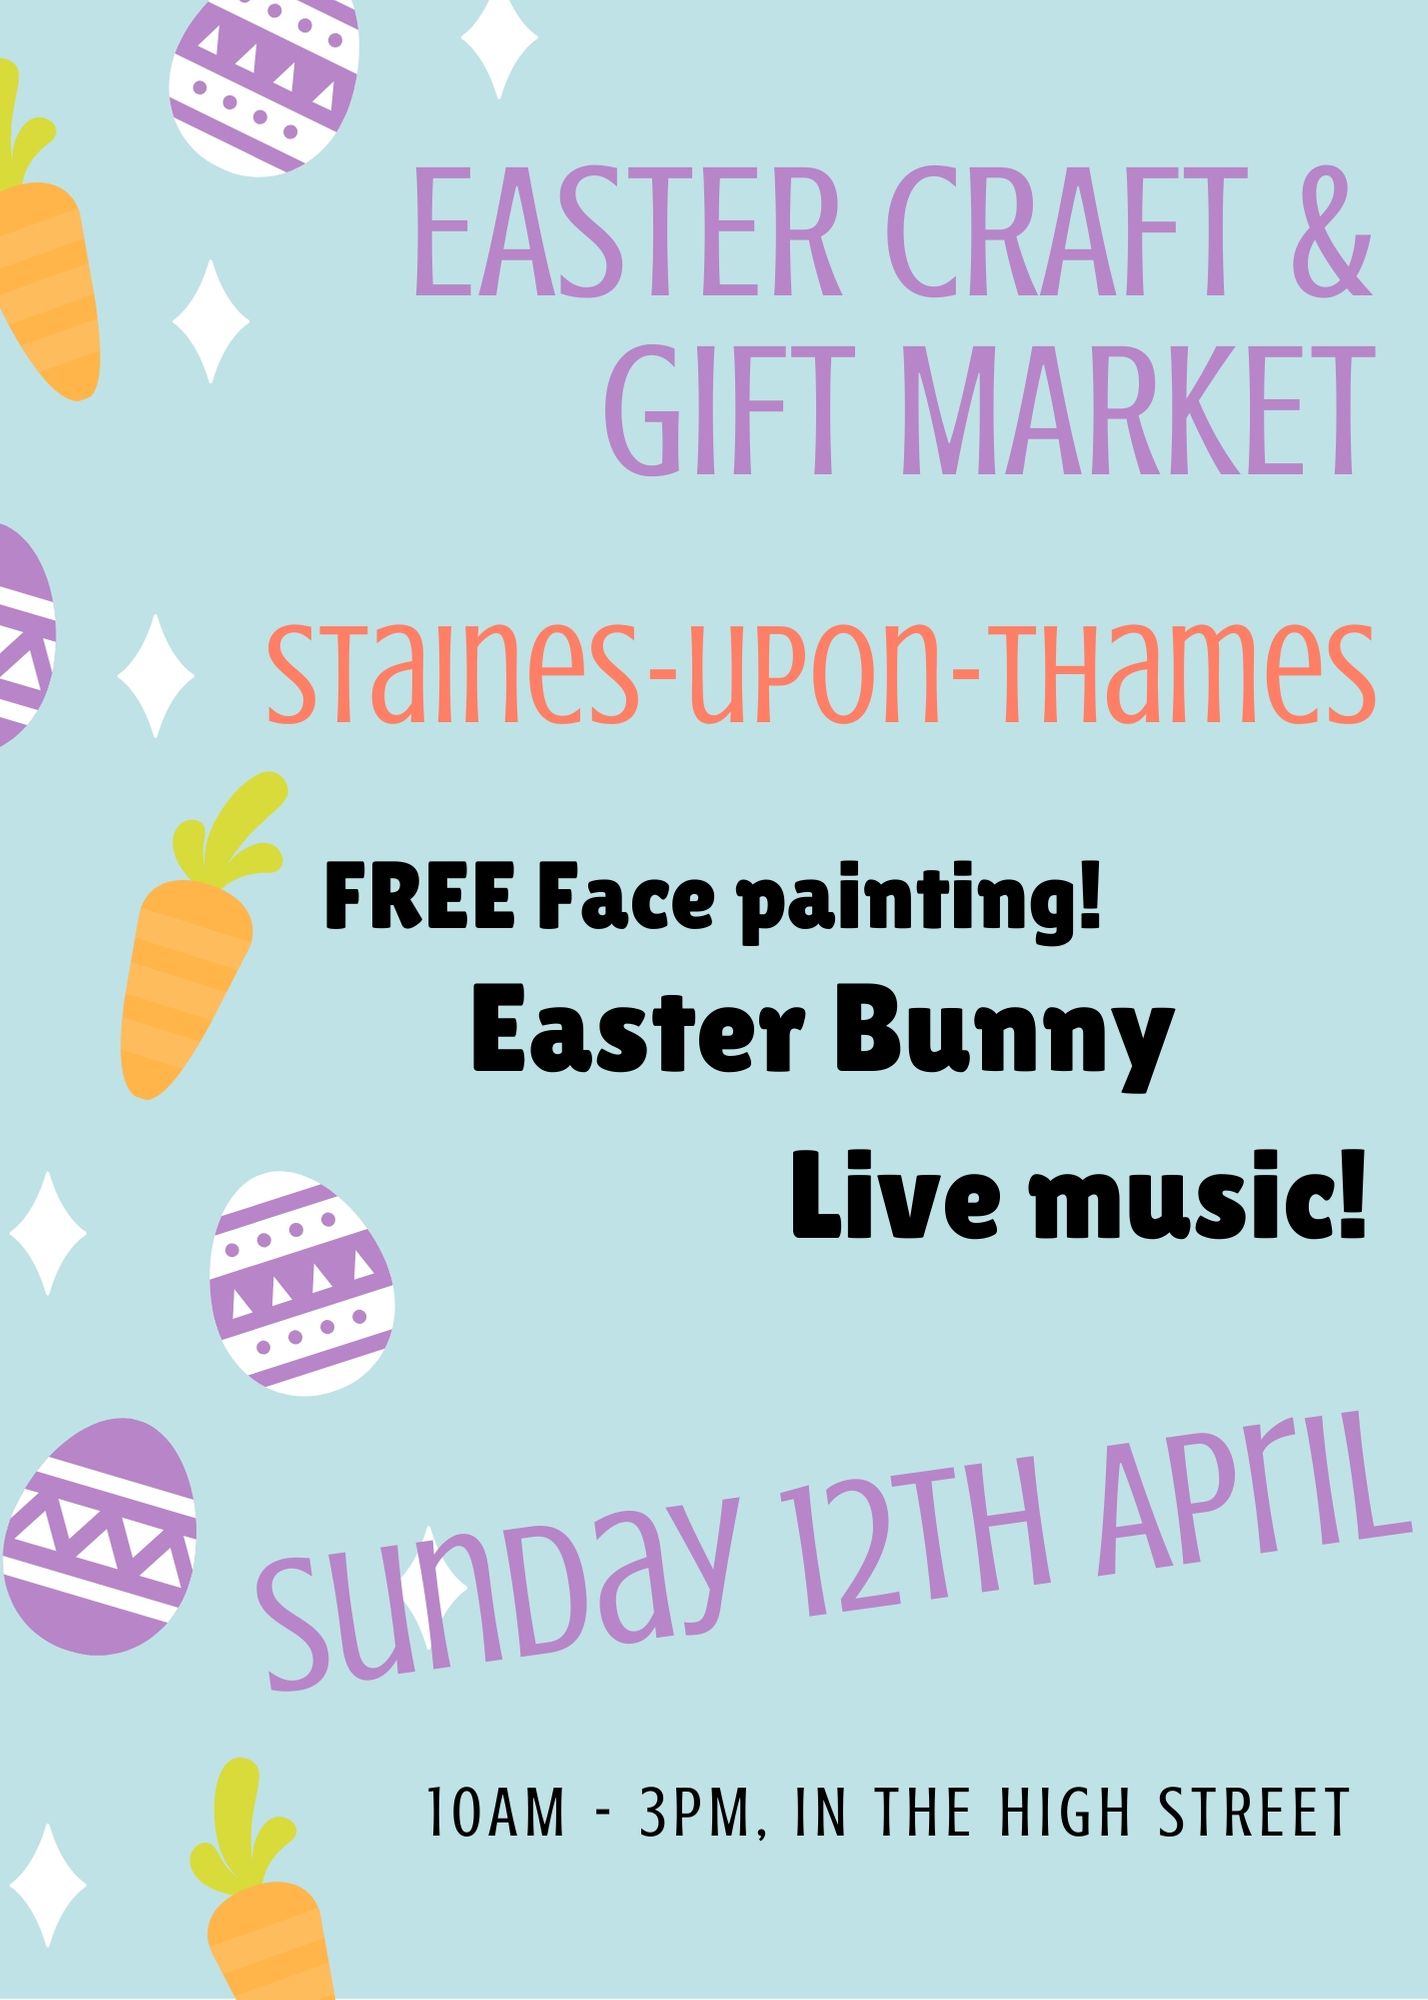 Easter craft and gift fair Craft Fair in Staines Surrey